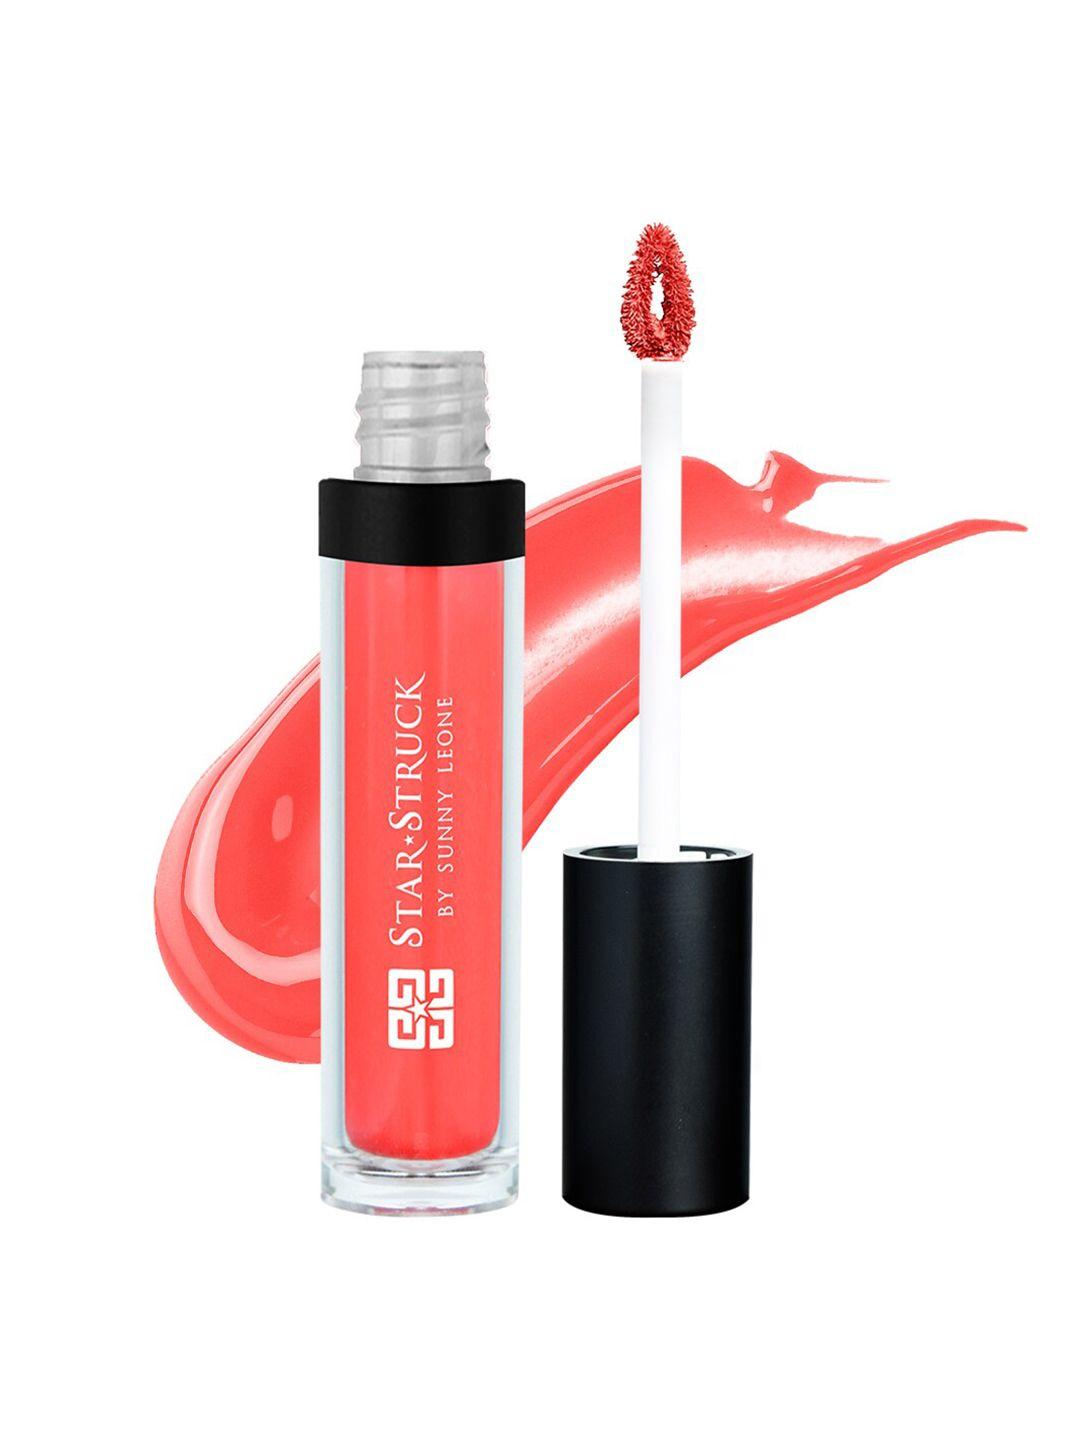 star struck by sunny leone hydrating glossy lip tint with hyaluronic acid 6ml - coral kiss